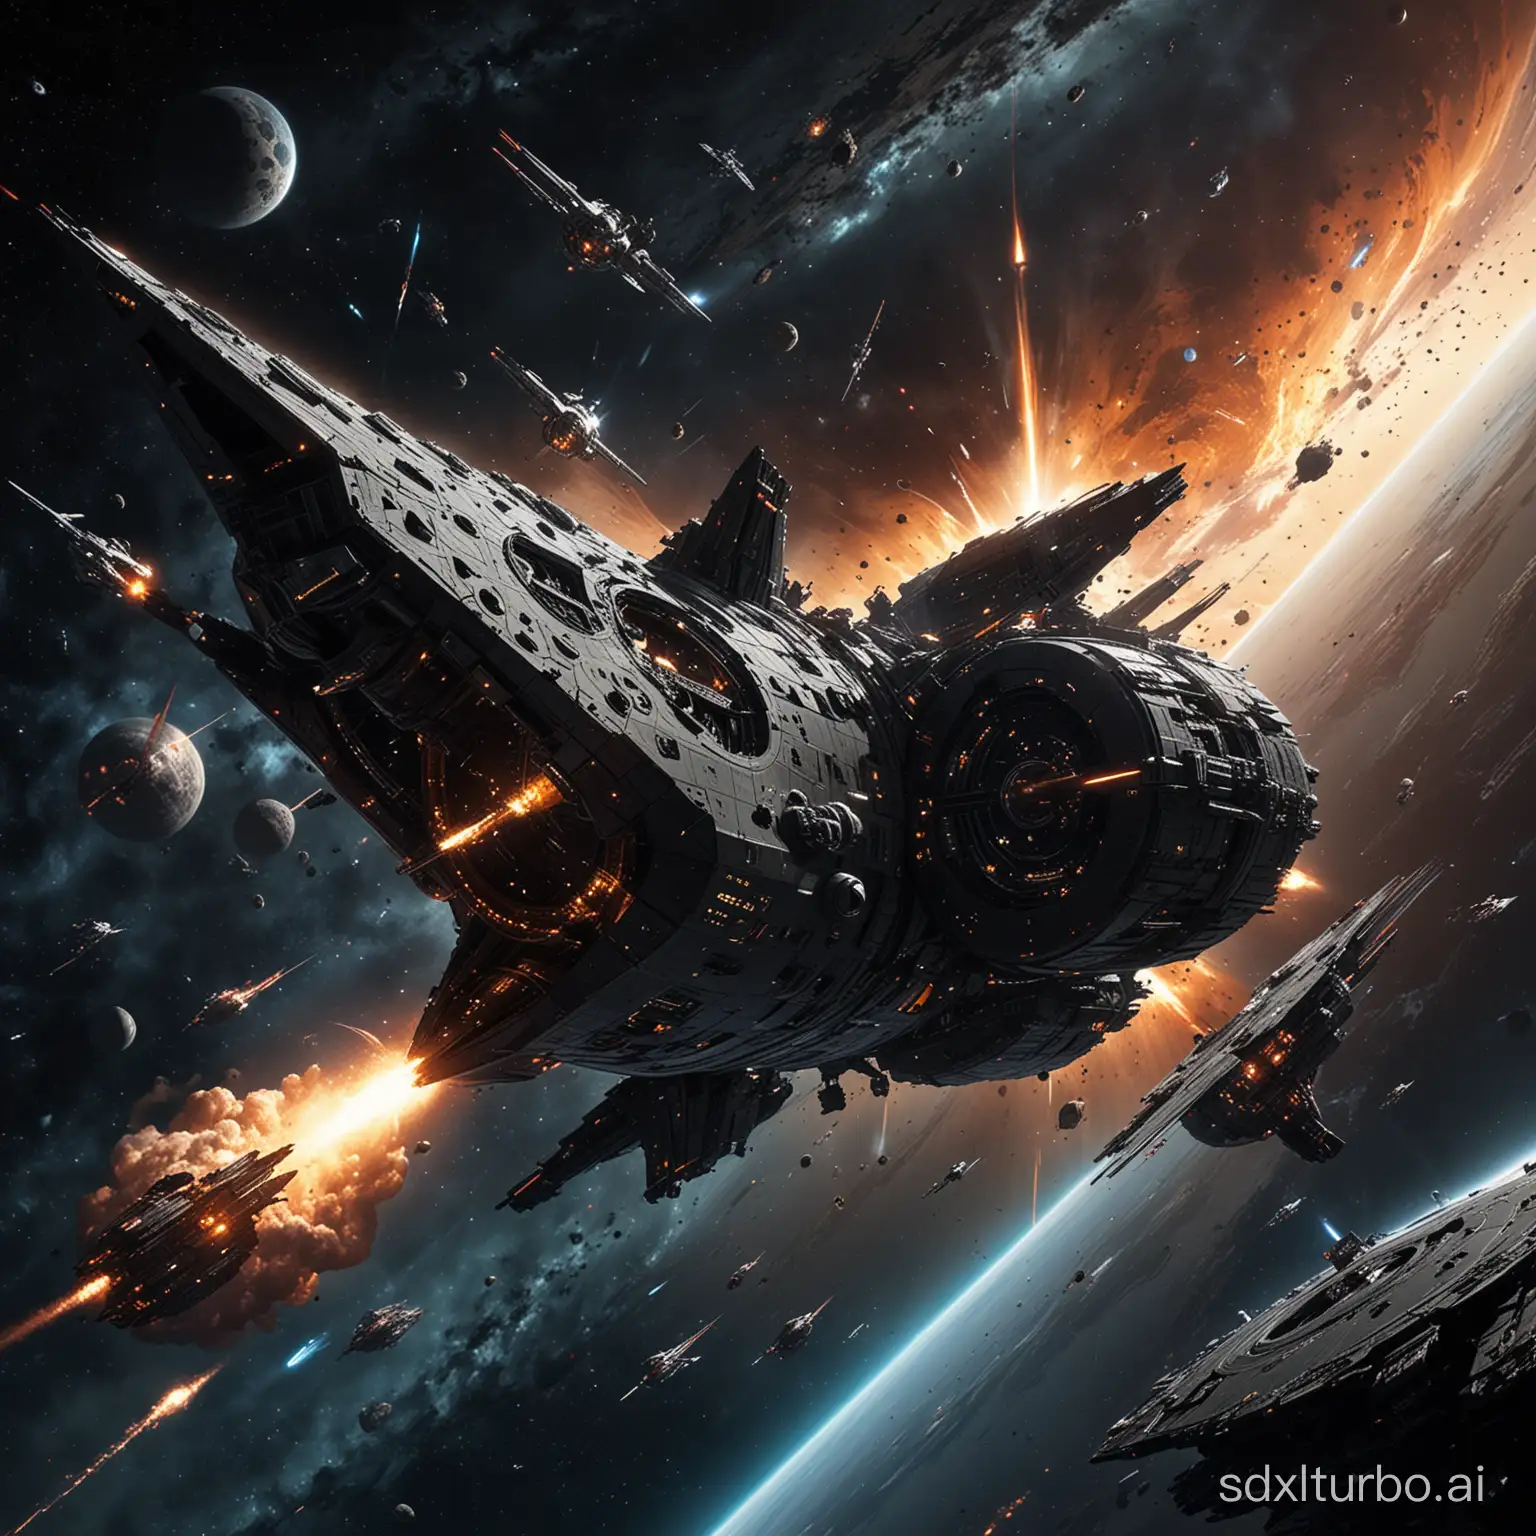 "Create an image that depicts an epic space battle, similar in visual style to Star Wars. Several spacecraft of different sizes are engaging in combat in space. In the foreground, highlight a distinctive spacecraft, recognizable by its unique features inspired by the fictional planet Hubobalipopotrototo. The habitability of this spacecraft should reflect elements of the culture or environment of this planet, with distinct patterns and shapes that differentiate it from other vessels. Ensure that this inhabitant of Hubobalipopotrototo is clearly identifiable, perhaps by their physical appearance or uniform. In the background of the image, include a massive black hole, creating a stark contrast with the chaotic action of the space battle. The distorted light and gravitational distortions around the black hole should add a dark and menacing atmosphere to the scene. Ensure that the overall composition of the image is dynamic and captivating, capturing the intensity of space warfare and the grandeur of space."